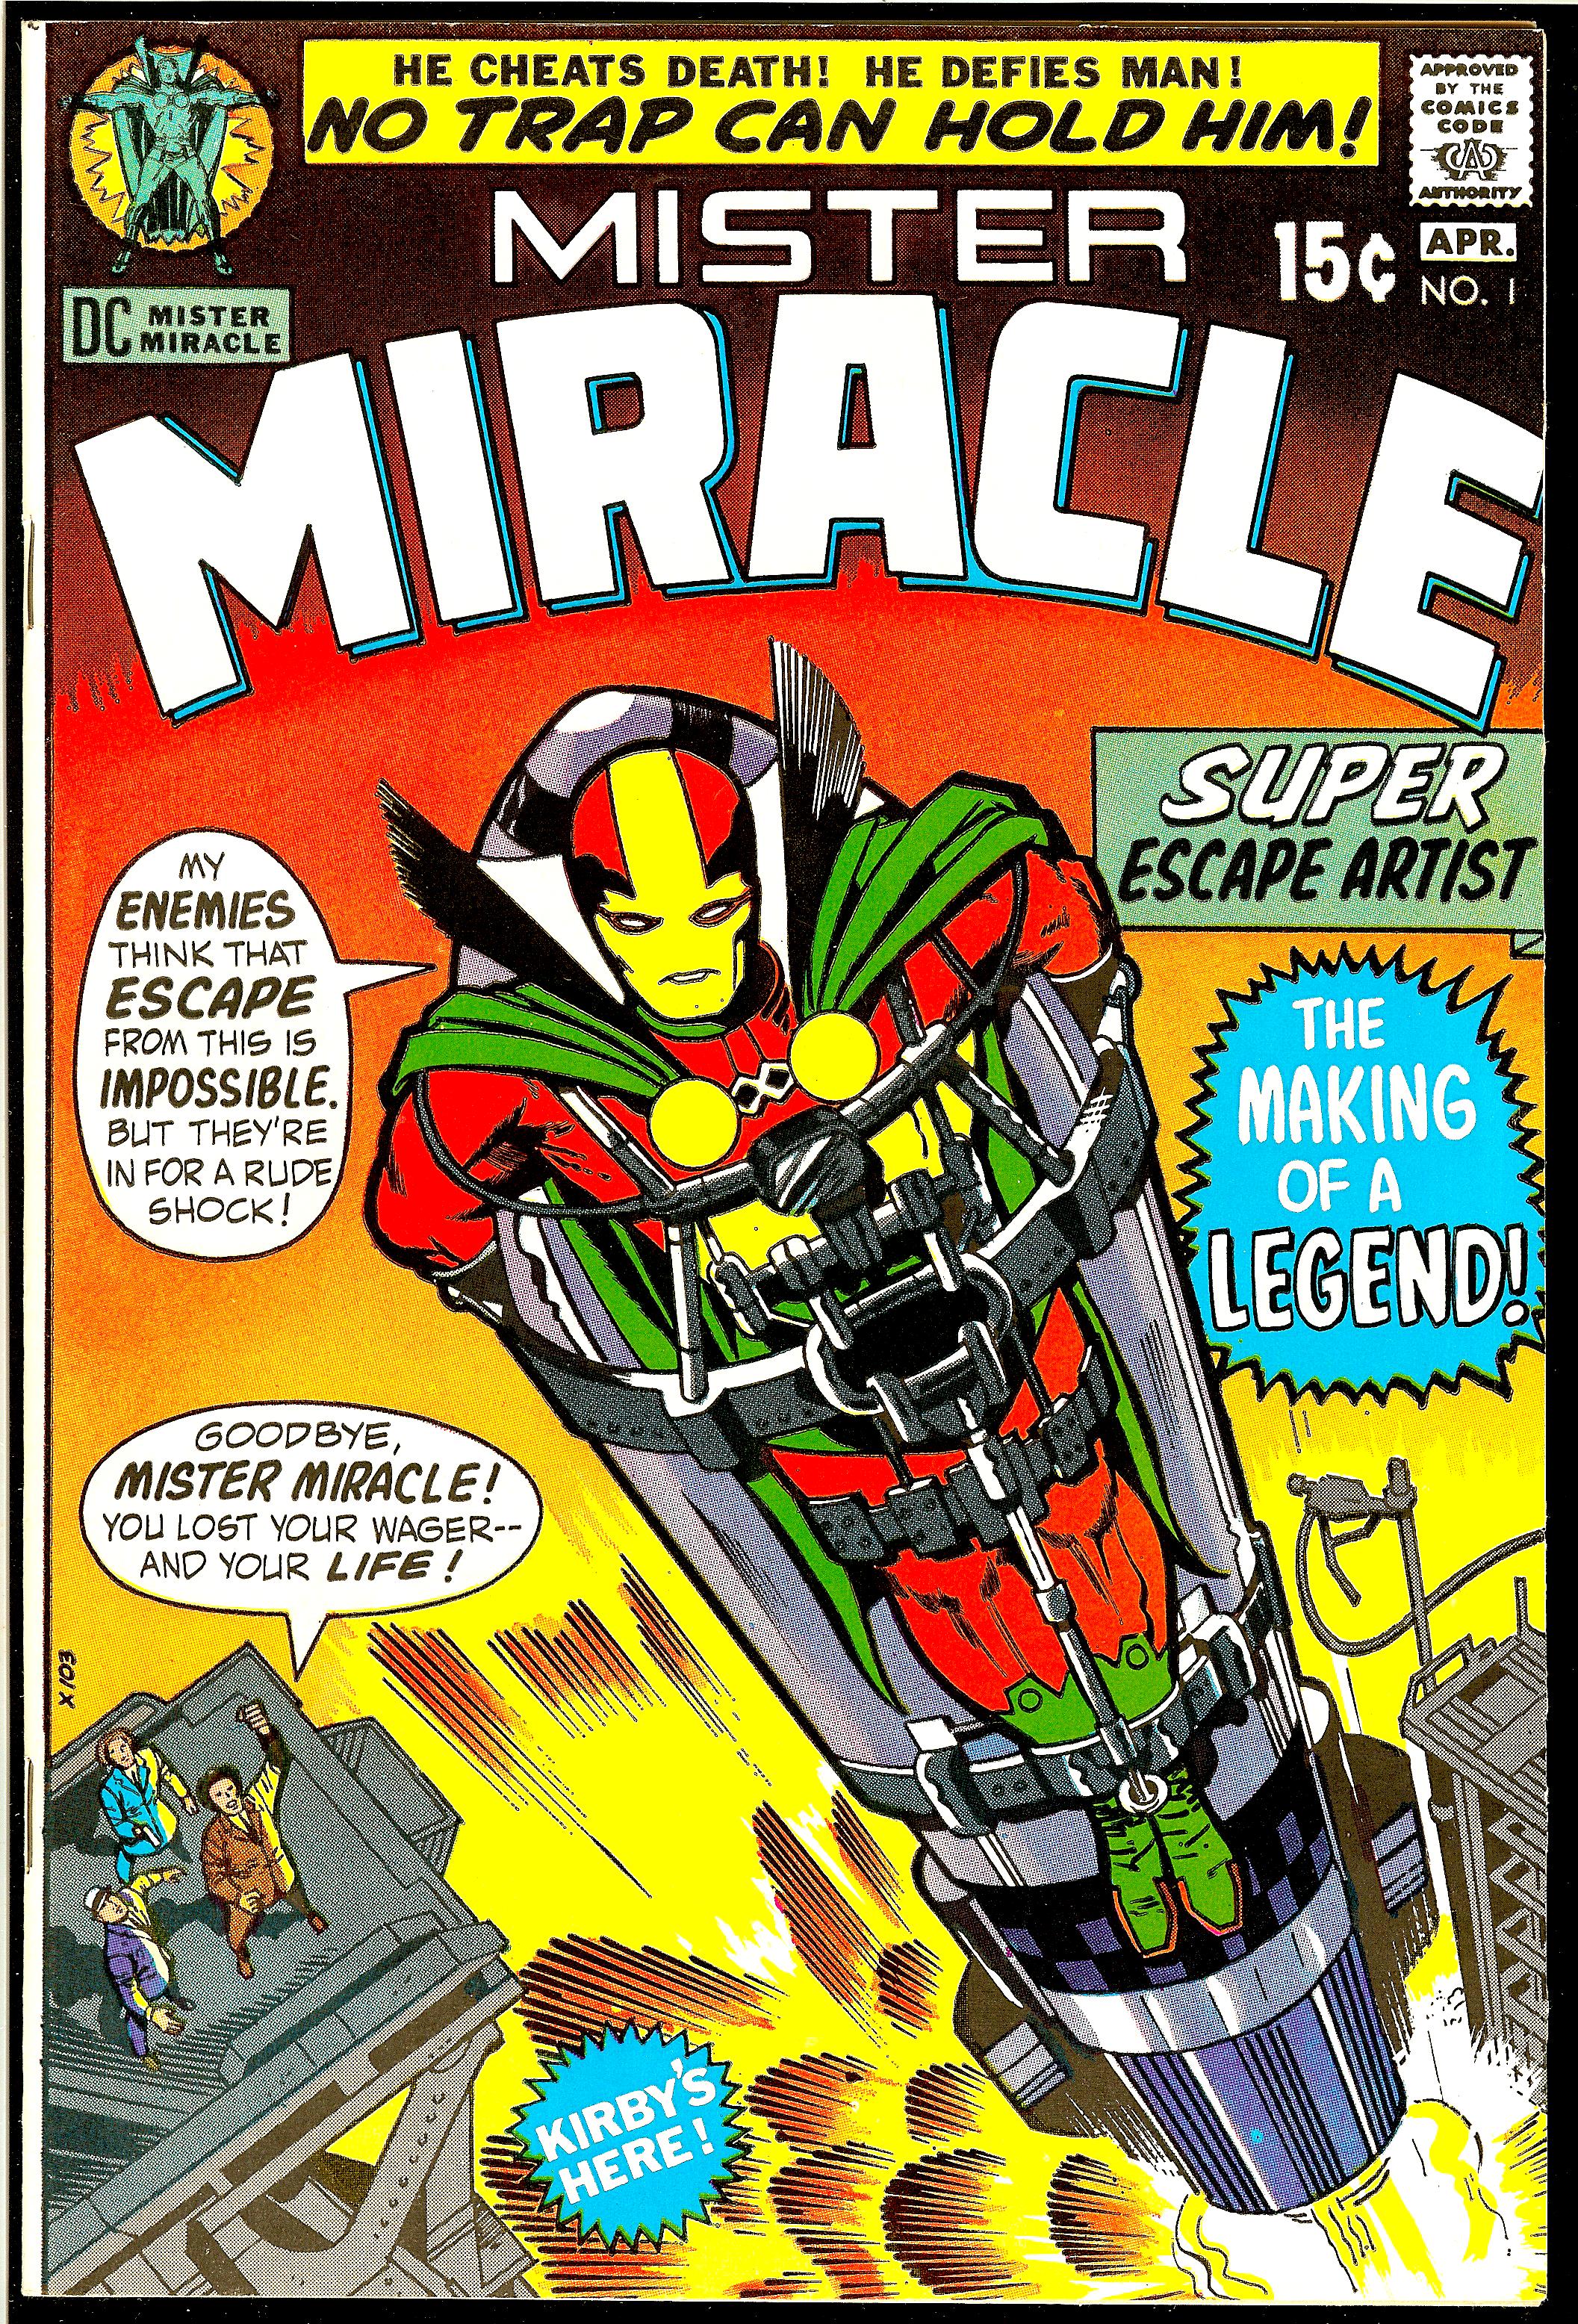 Mr Miracle #9